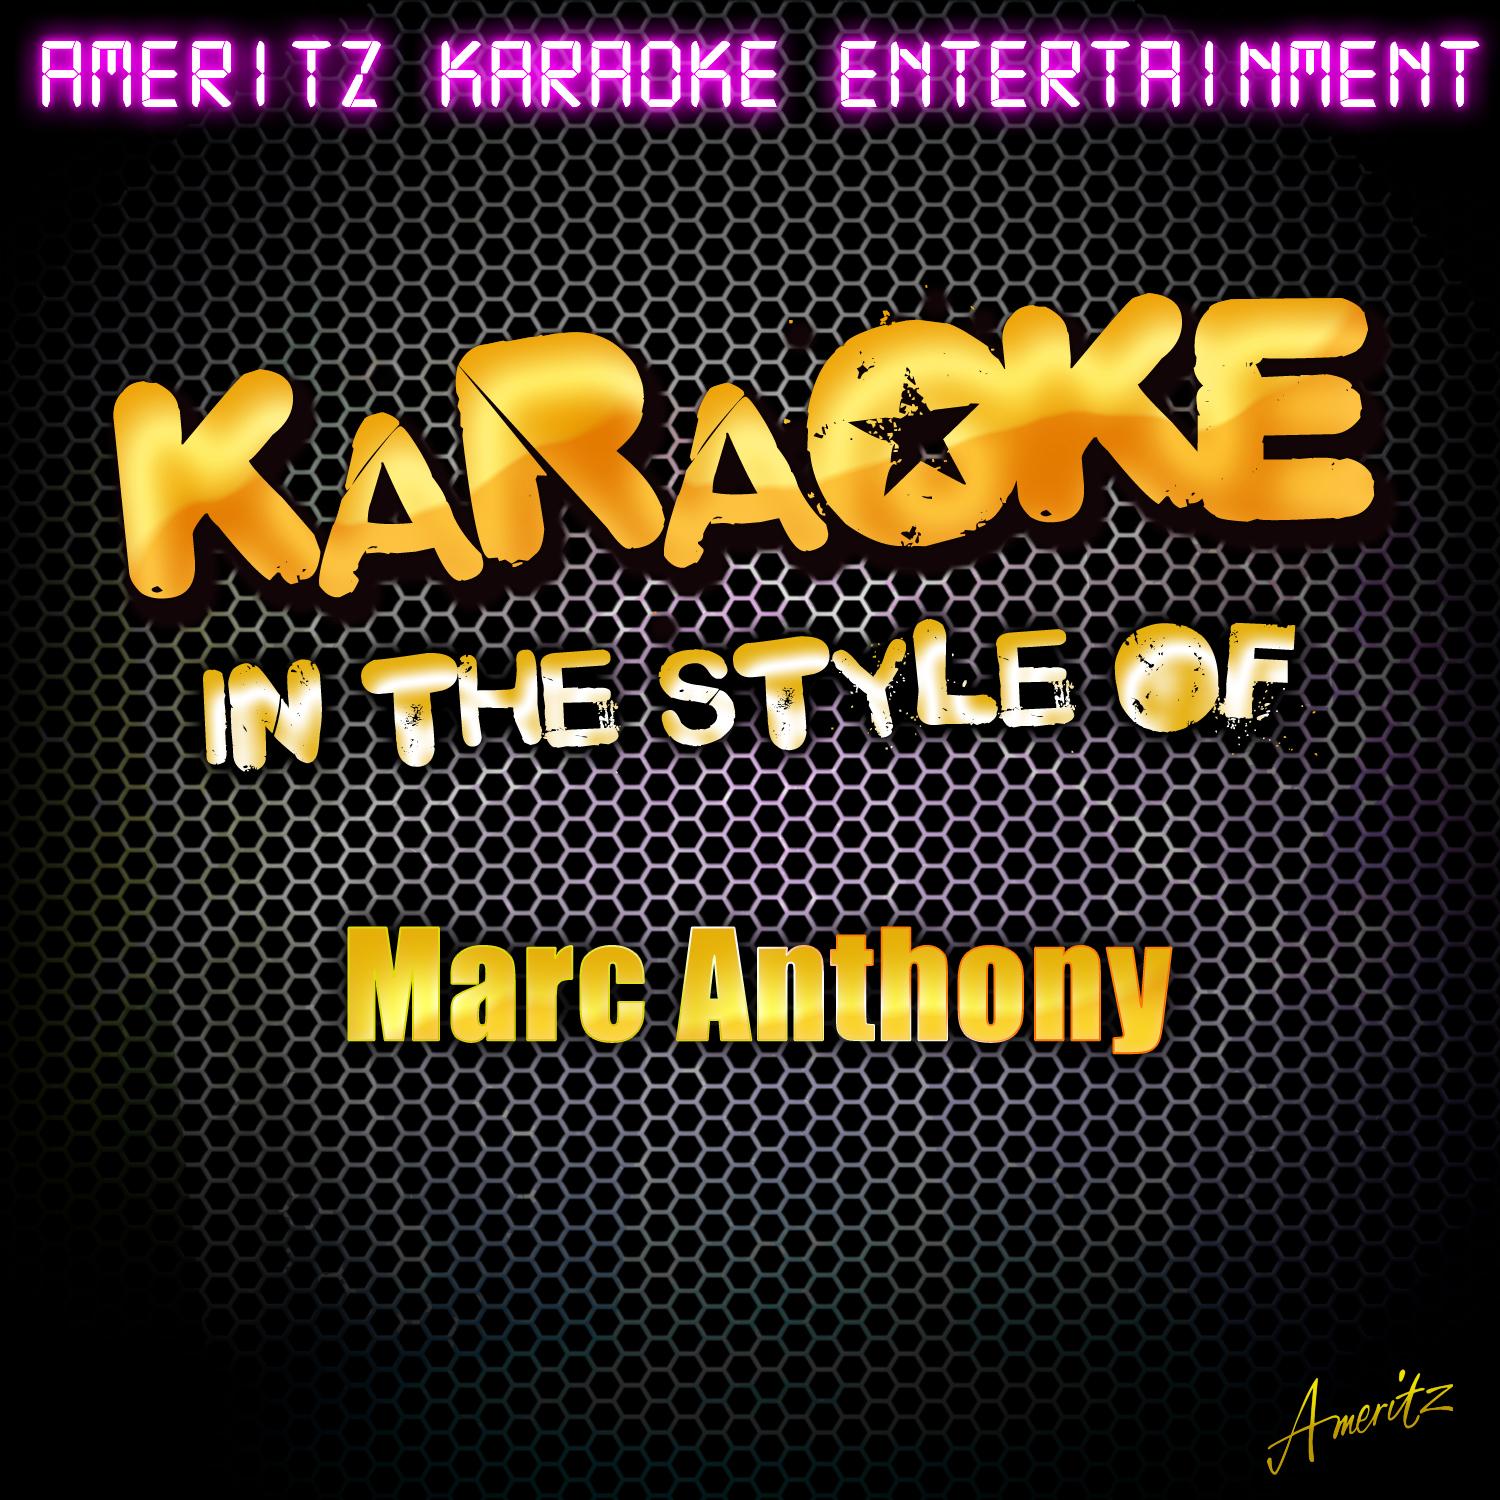 Karaoke (In the Style of Marc Anthony)